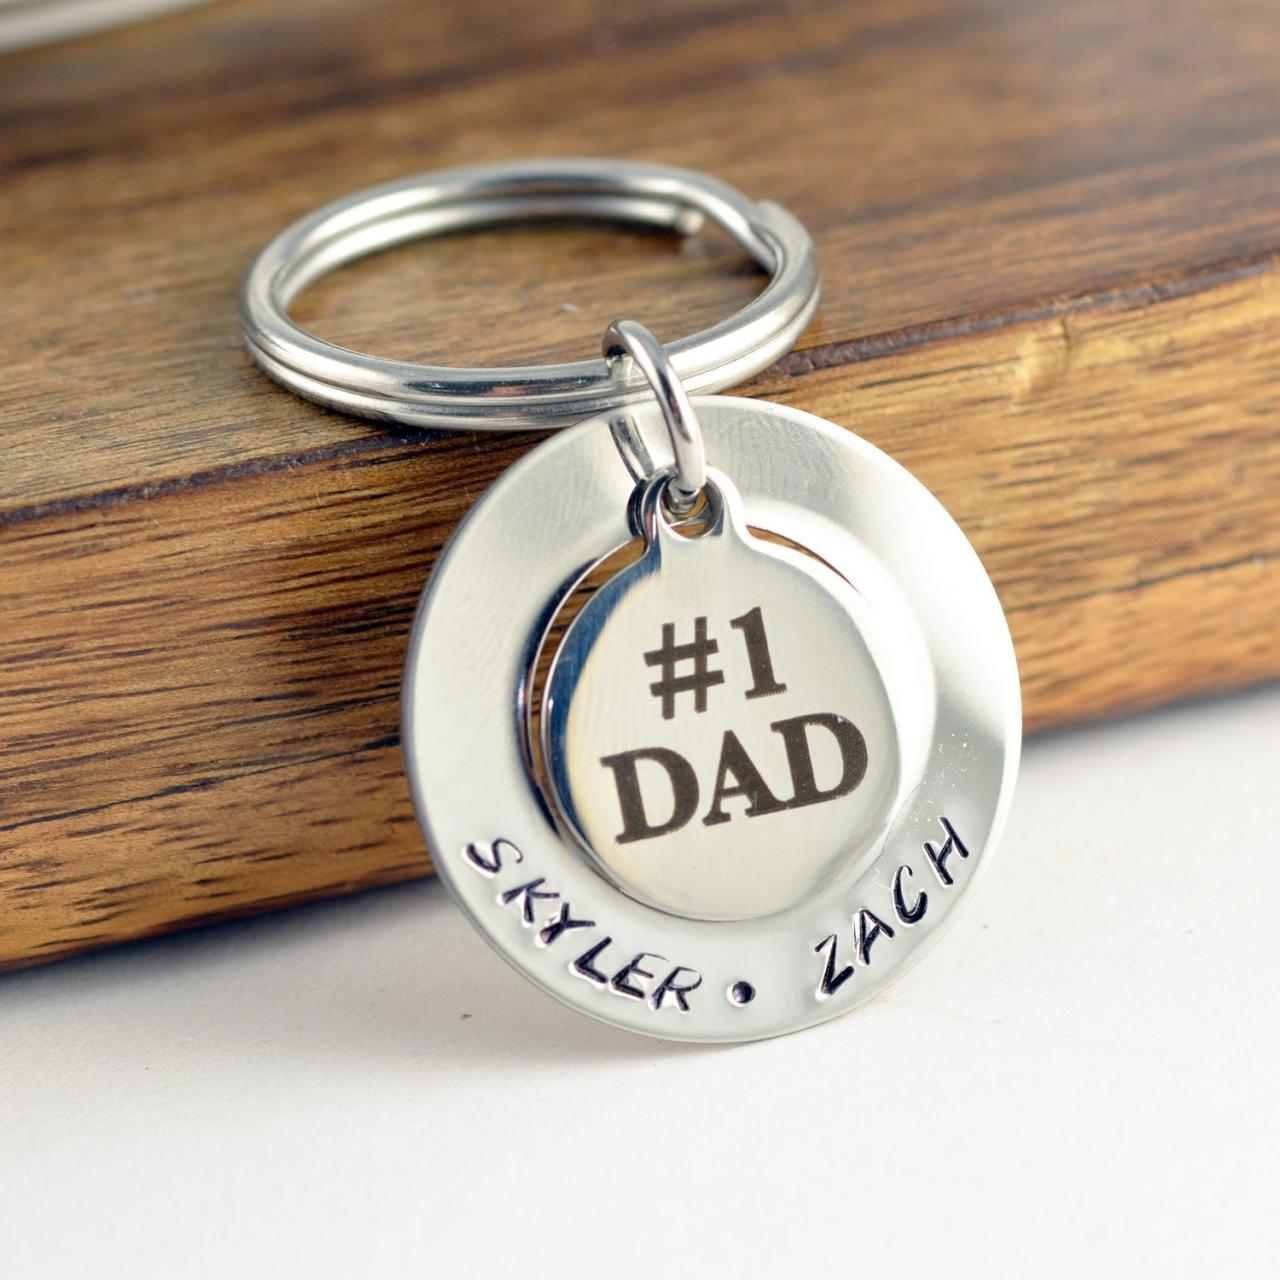 Personalized Fathers Day Keychain, #1 Dad Keychain, Personalized Father's Day Gift, Custom Keychain, Kids Names,dad Gift, Engraved